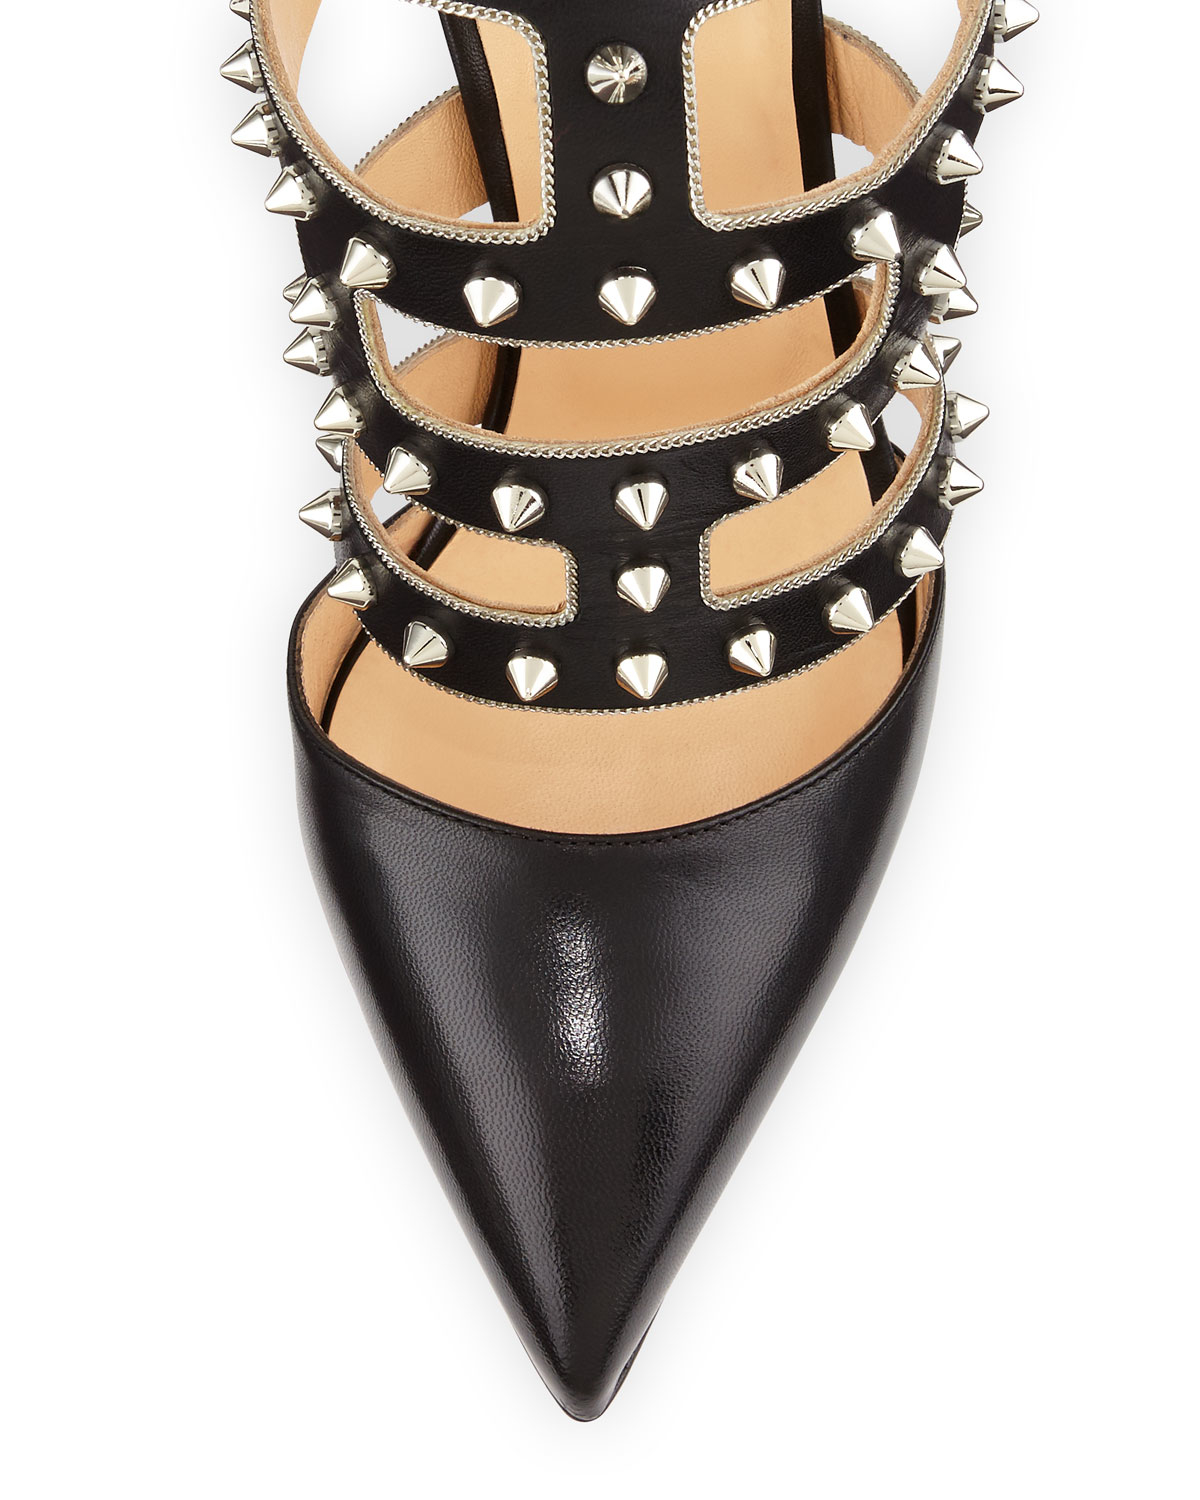 louboutin copy - Christian louboutin Tchikaboum Studded Red Sole Pump in Silver ...